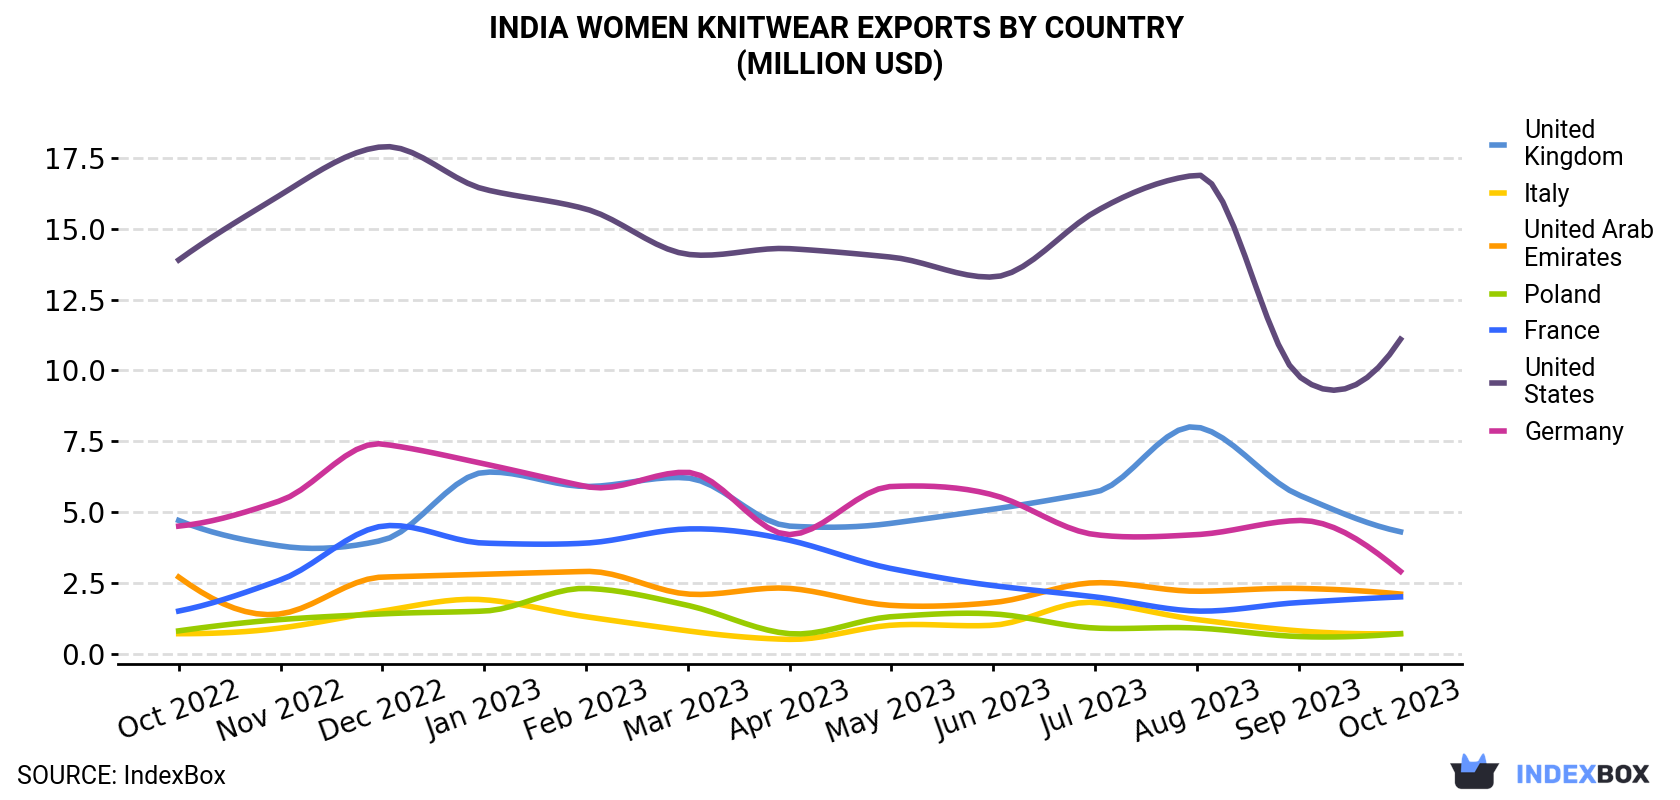 India Women Knitwear Exports By Country (Million USD)